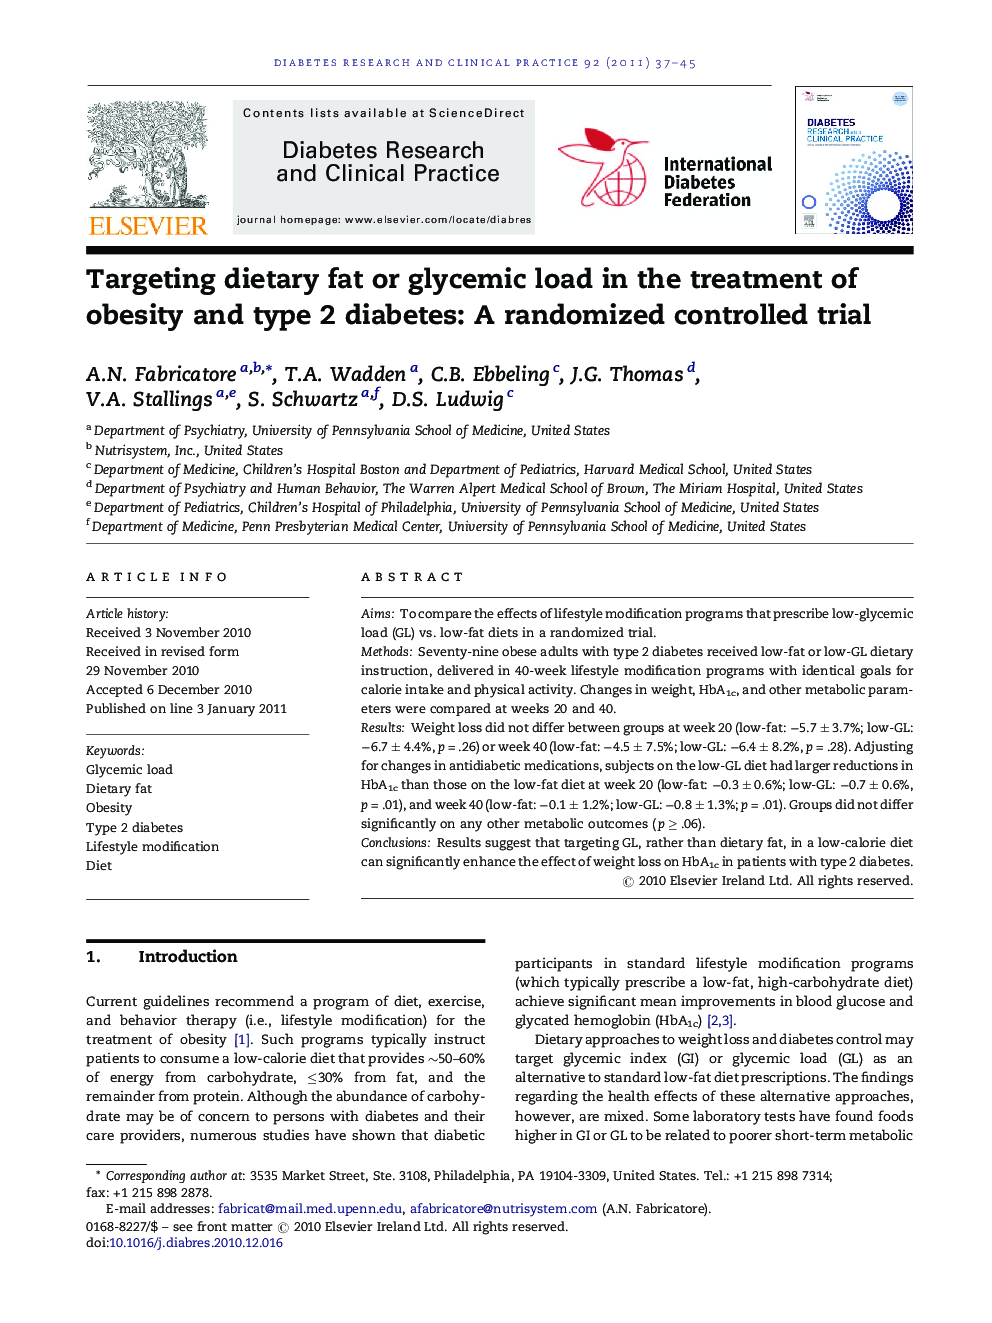 Targeting dietary fat or glycemic load in the treatment of obesity and type 2 diabetes: A randomized controlled trial